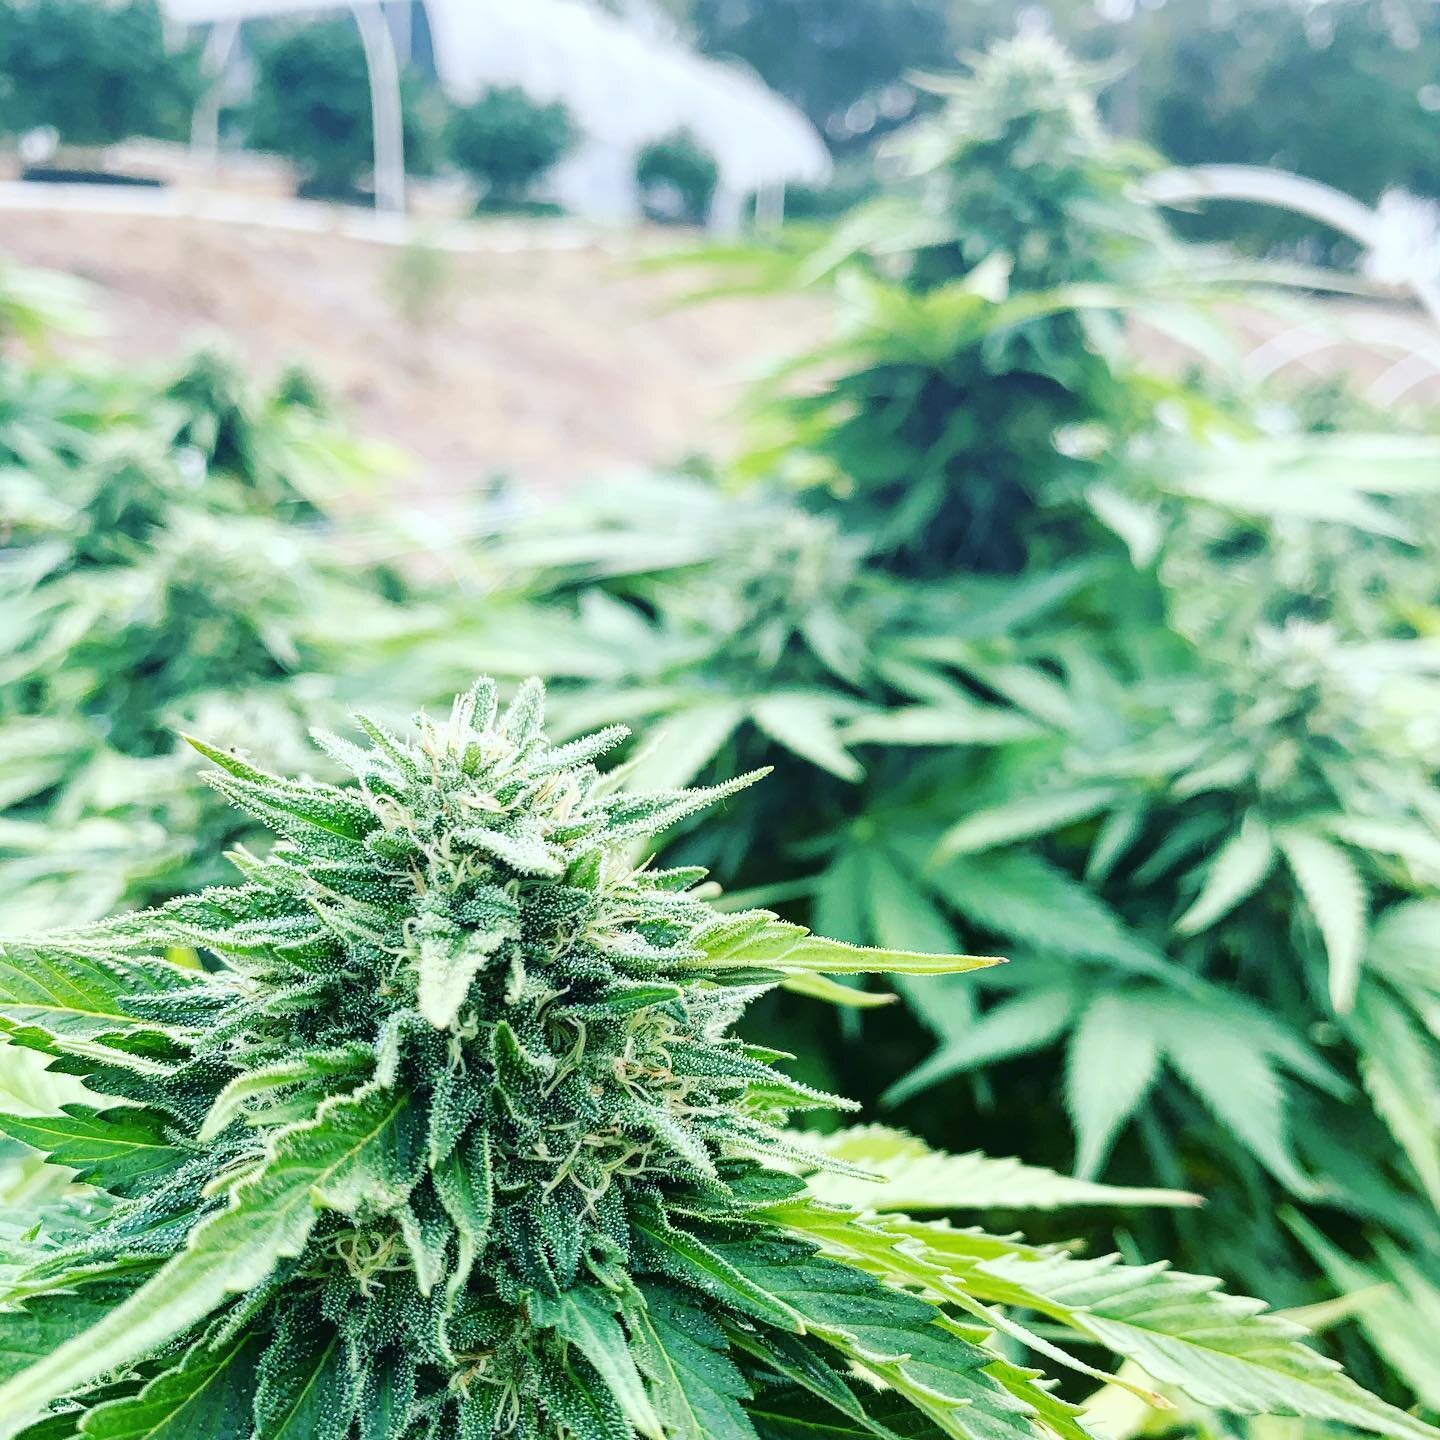 Some of the full term strains finishing up in the garden. No huge size this season with the late start but the ladies are finishing healthy and strong and the nose and structure on everything is amazing. Can&rsquo;t wait to start chopping them down o